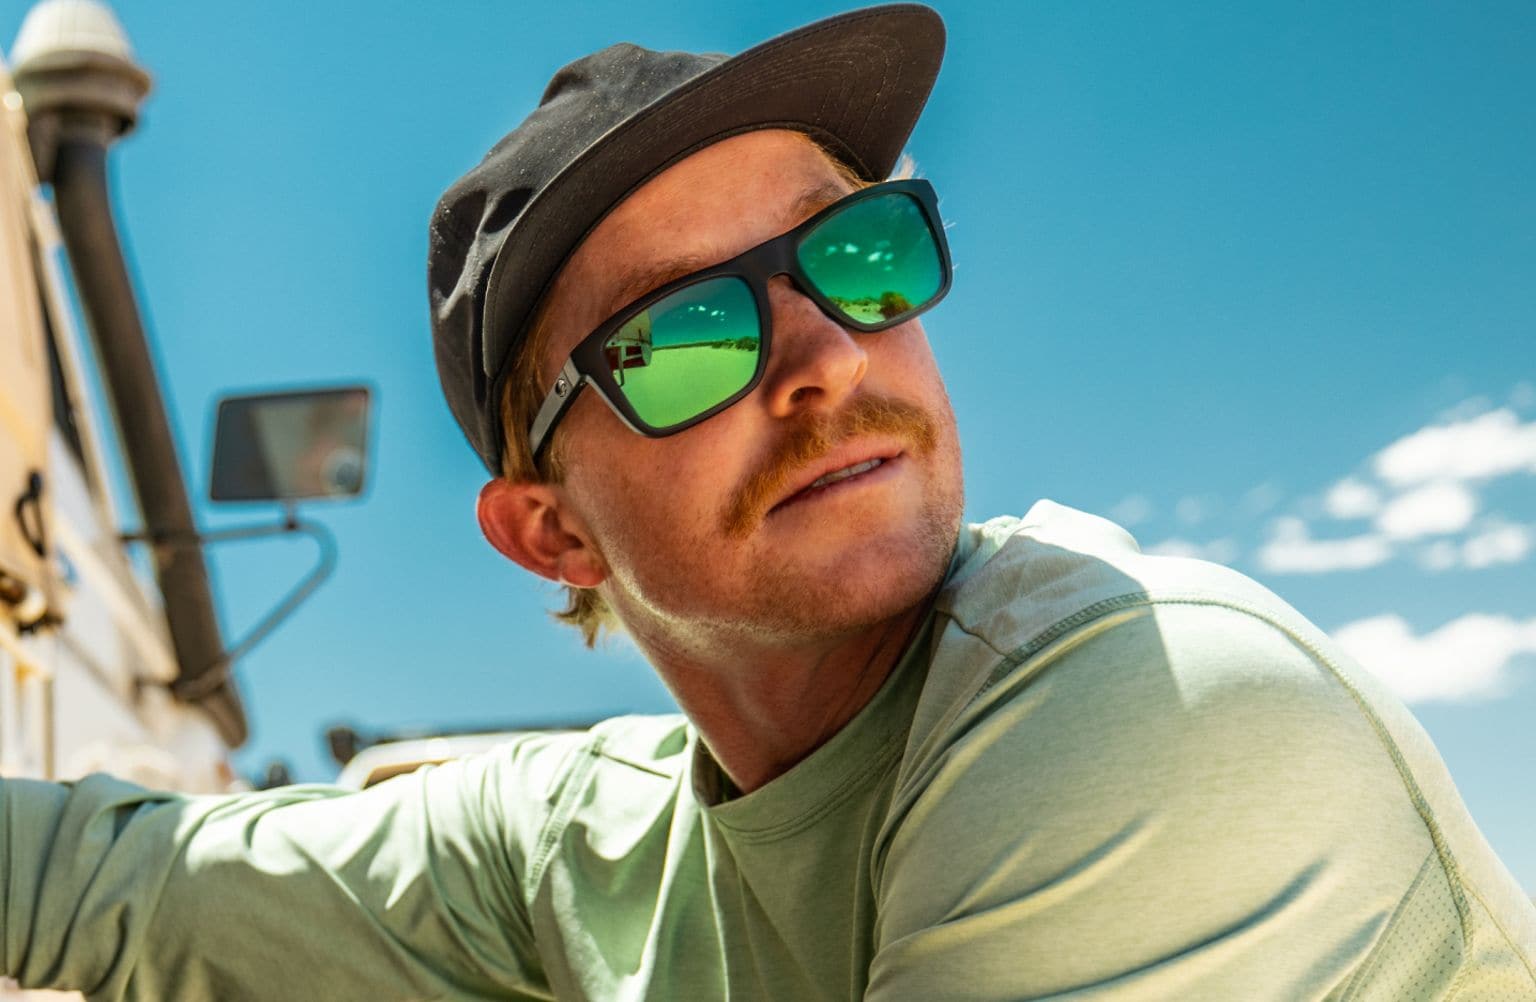 Costa Sunglasses Buyer's Guide: Everything You Need To Know, 46% OFF